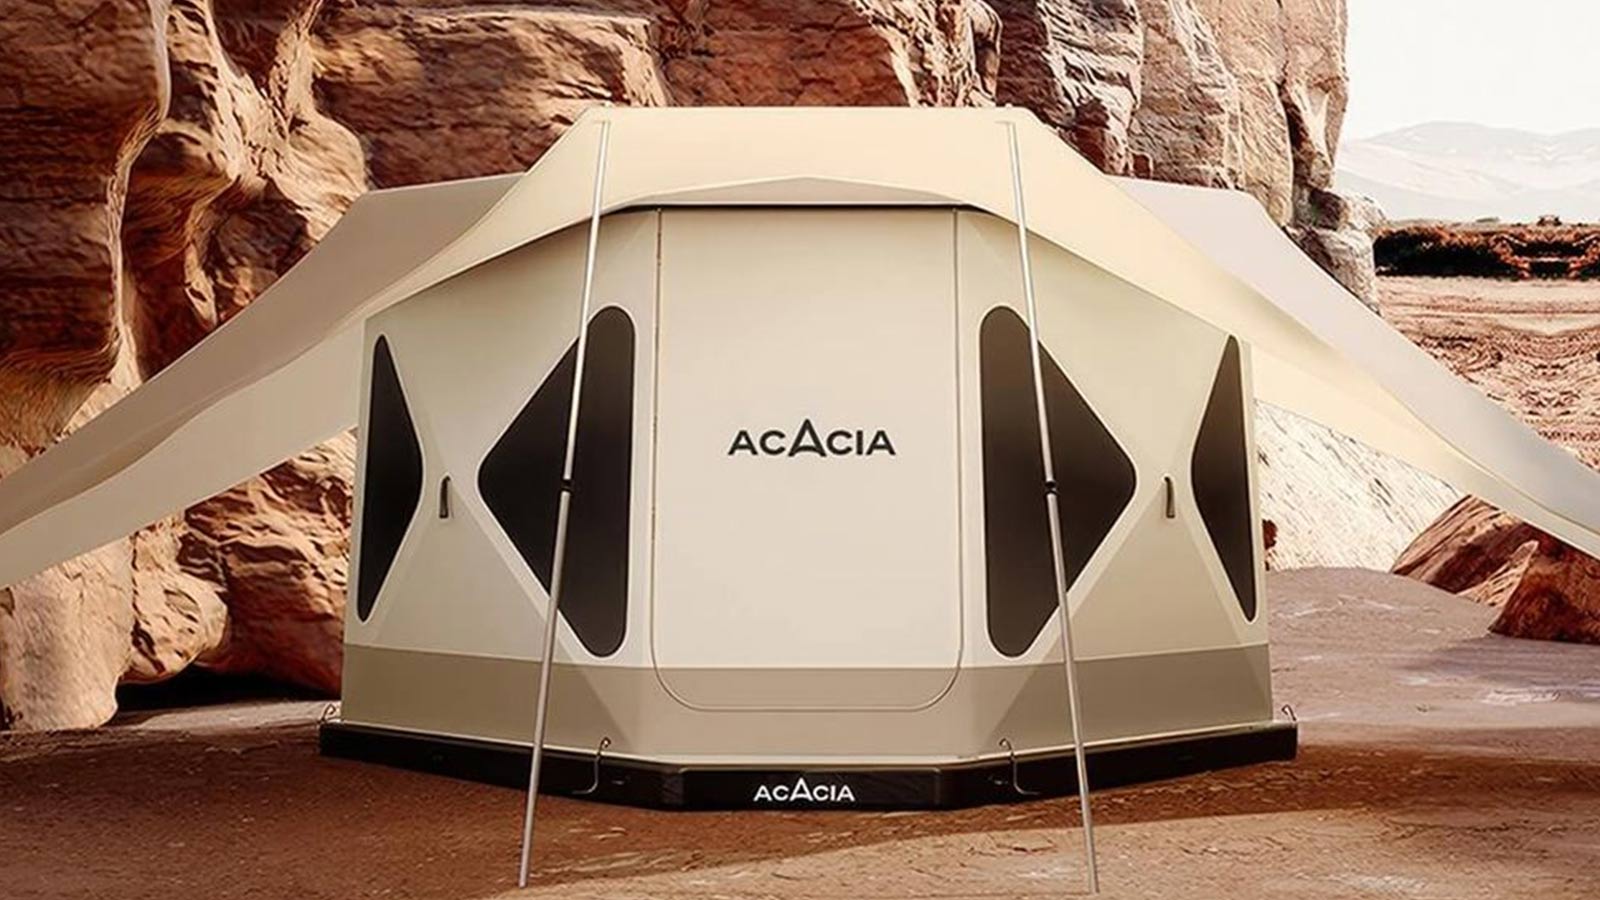 Space Acacia -World's First 3-In-1 Camping System